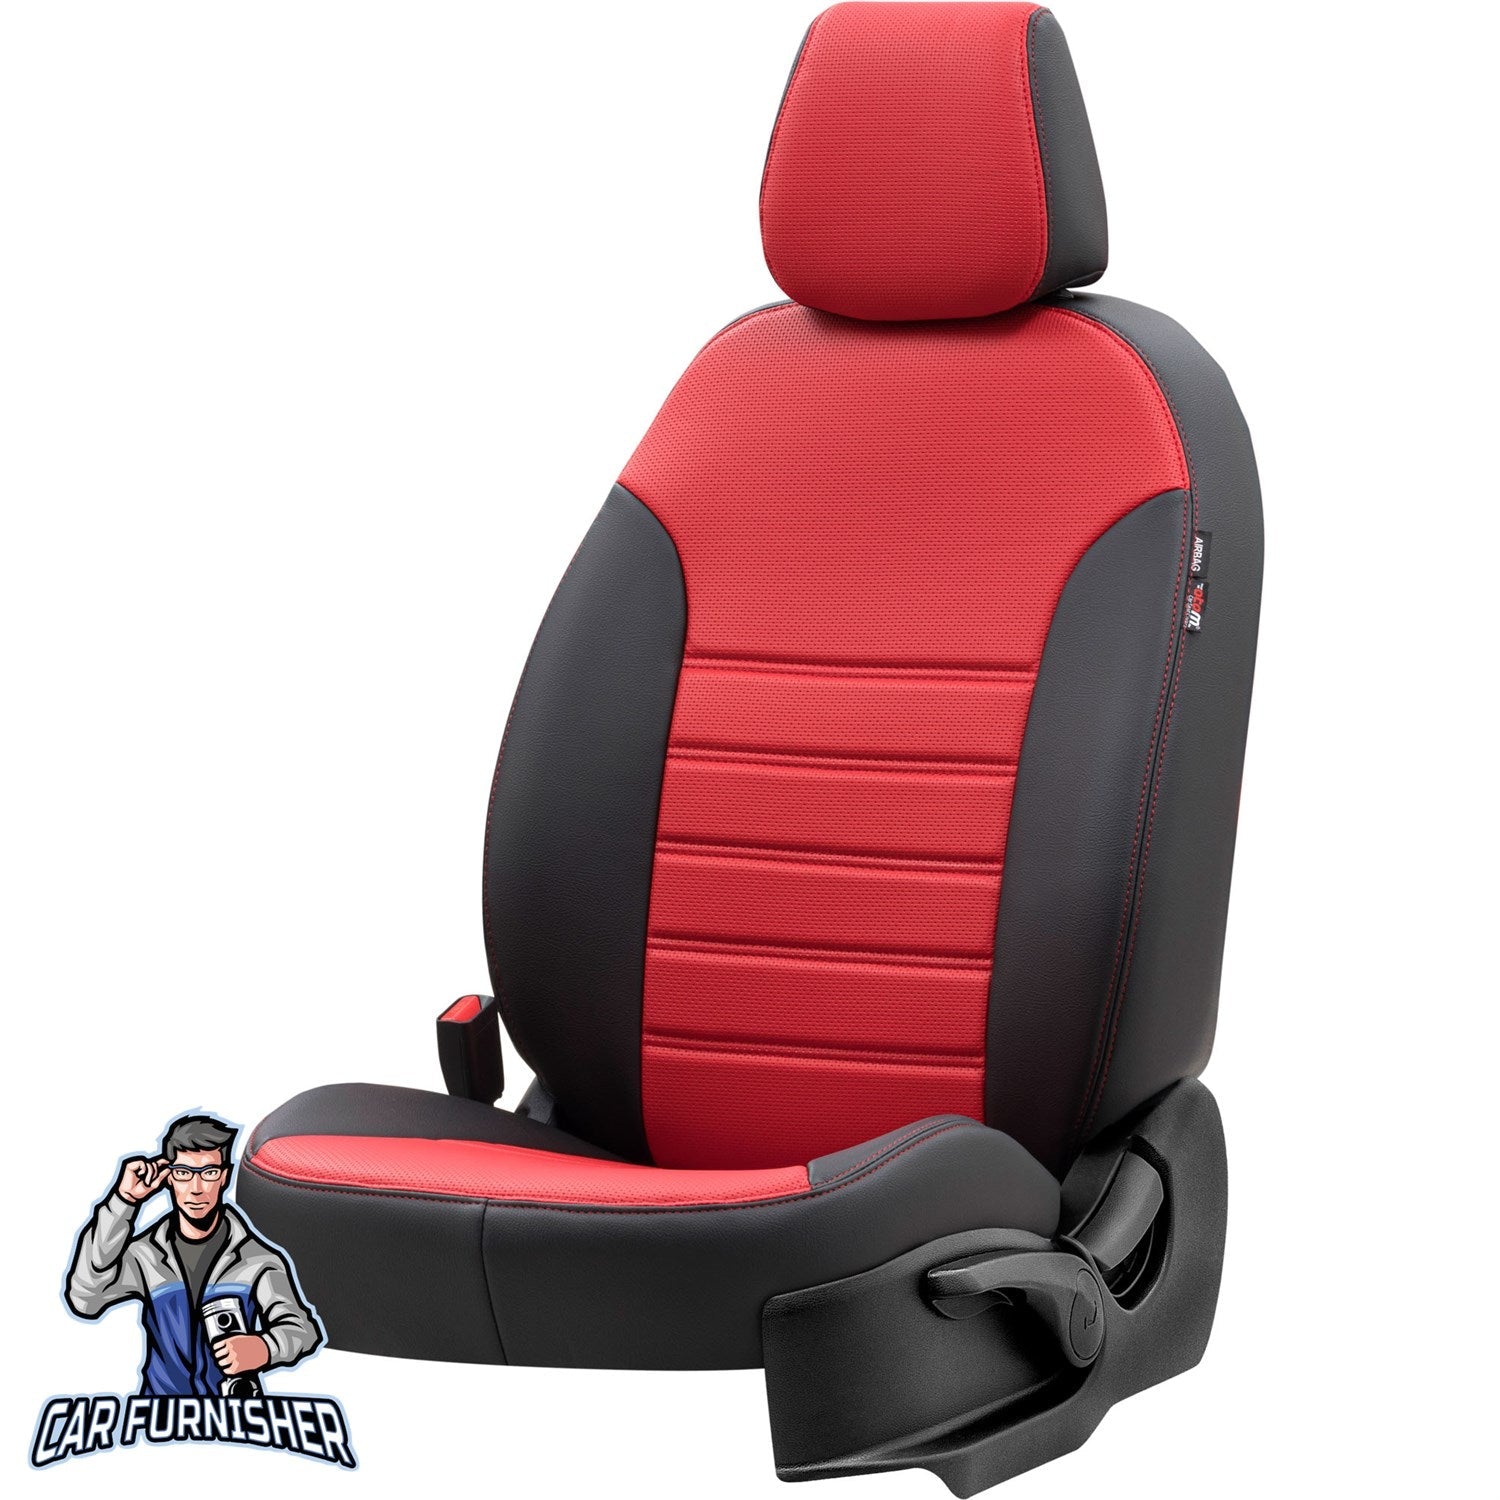 Volvo S80 Seat Cover New York Leather Design Red Leather